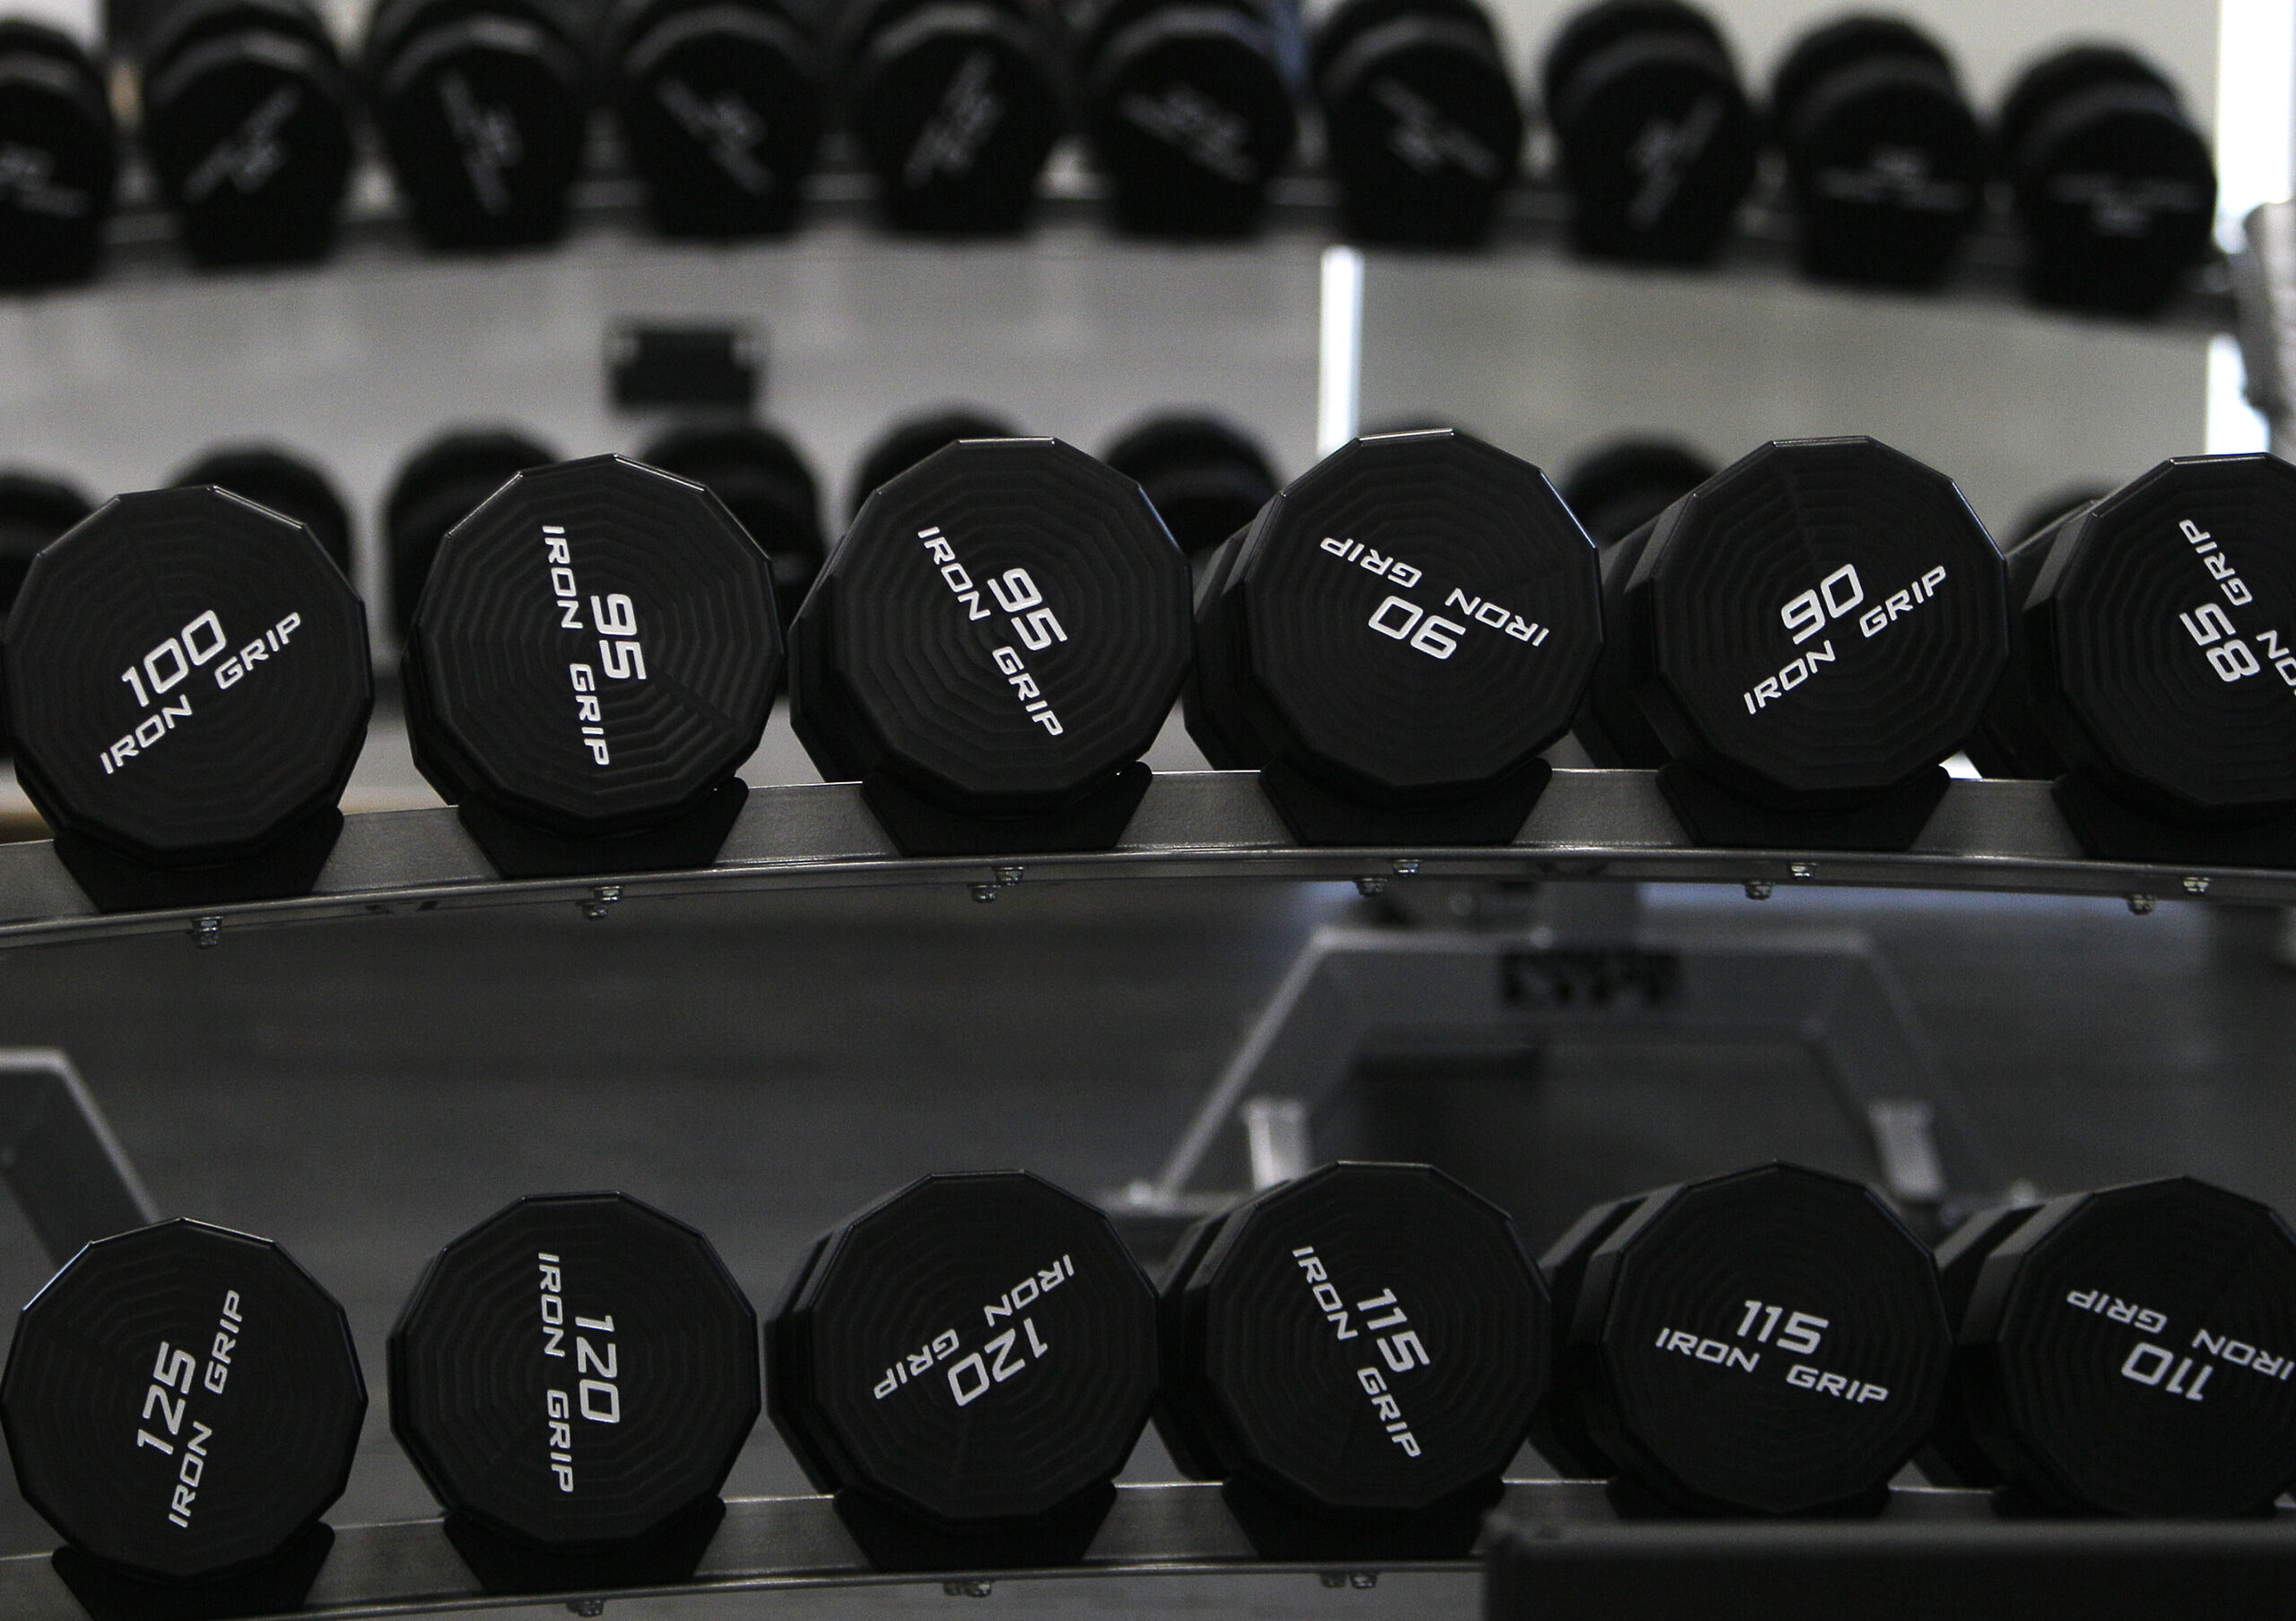 Black exercise weights lined up on a rack.